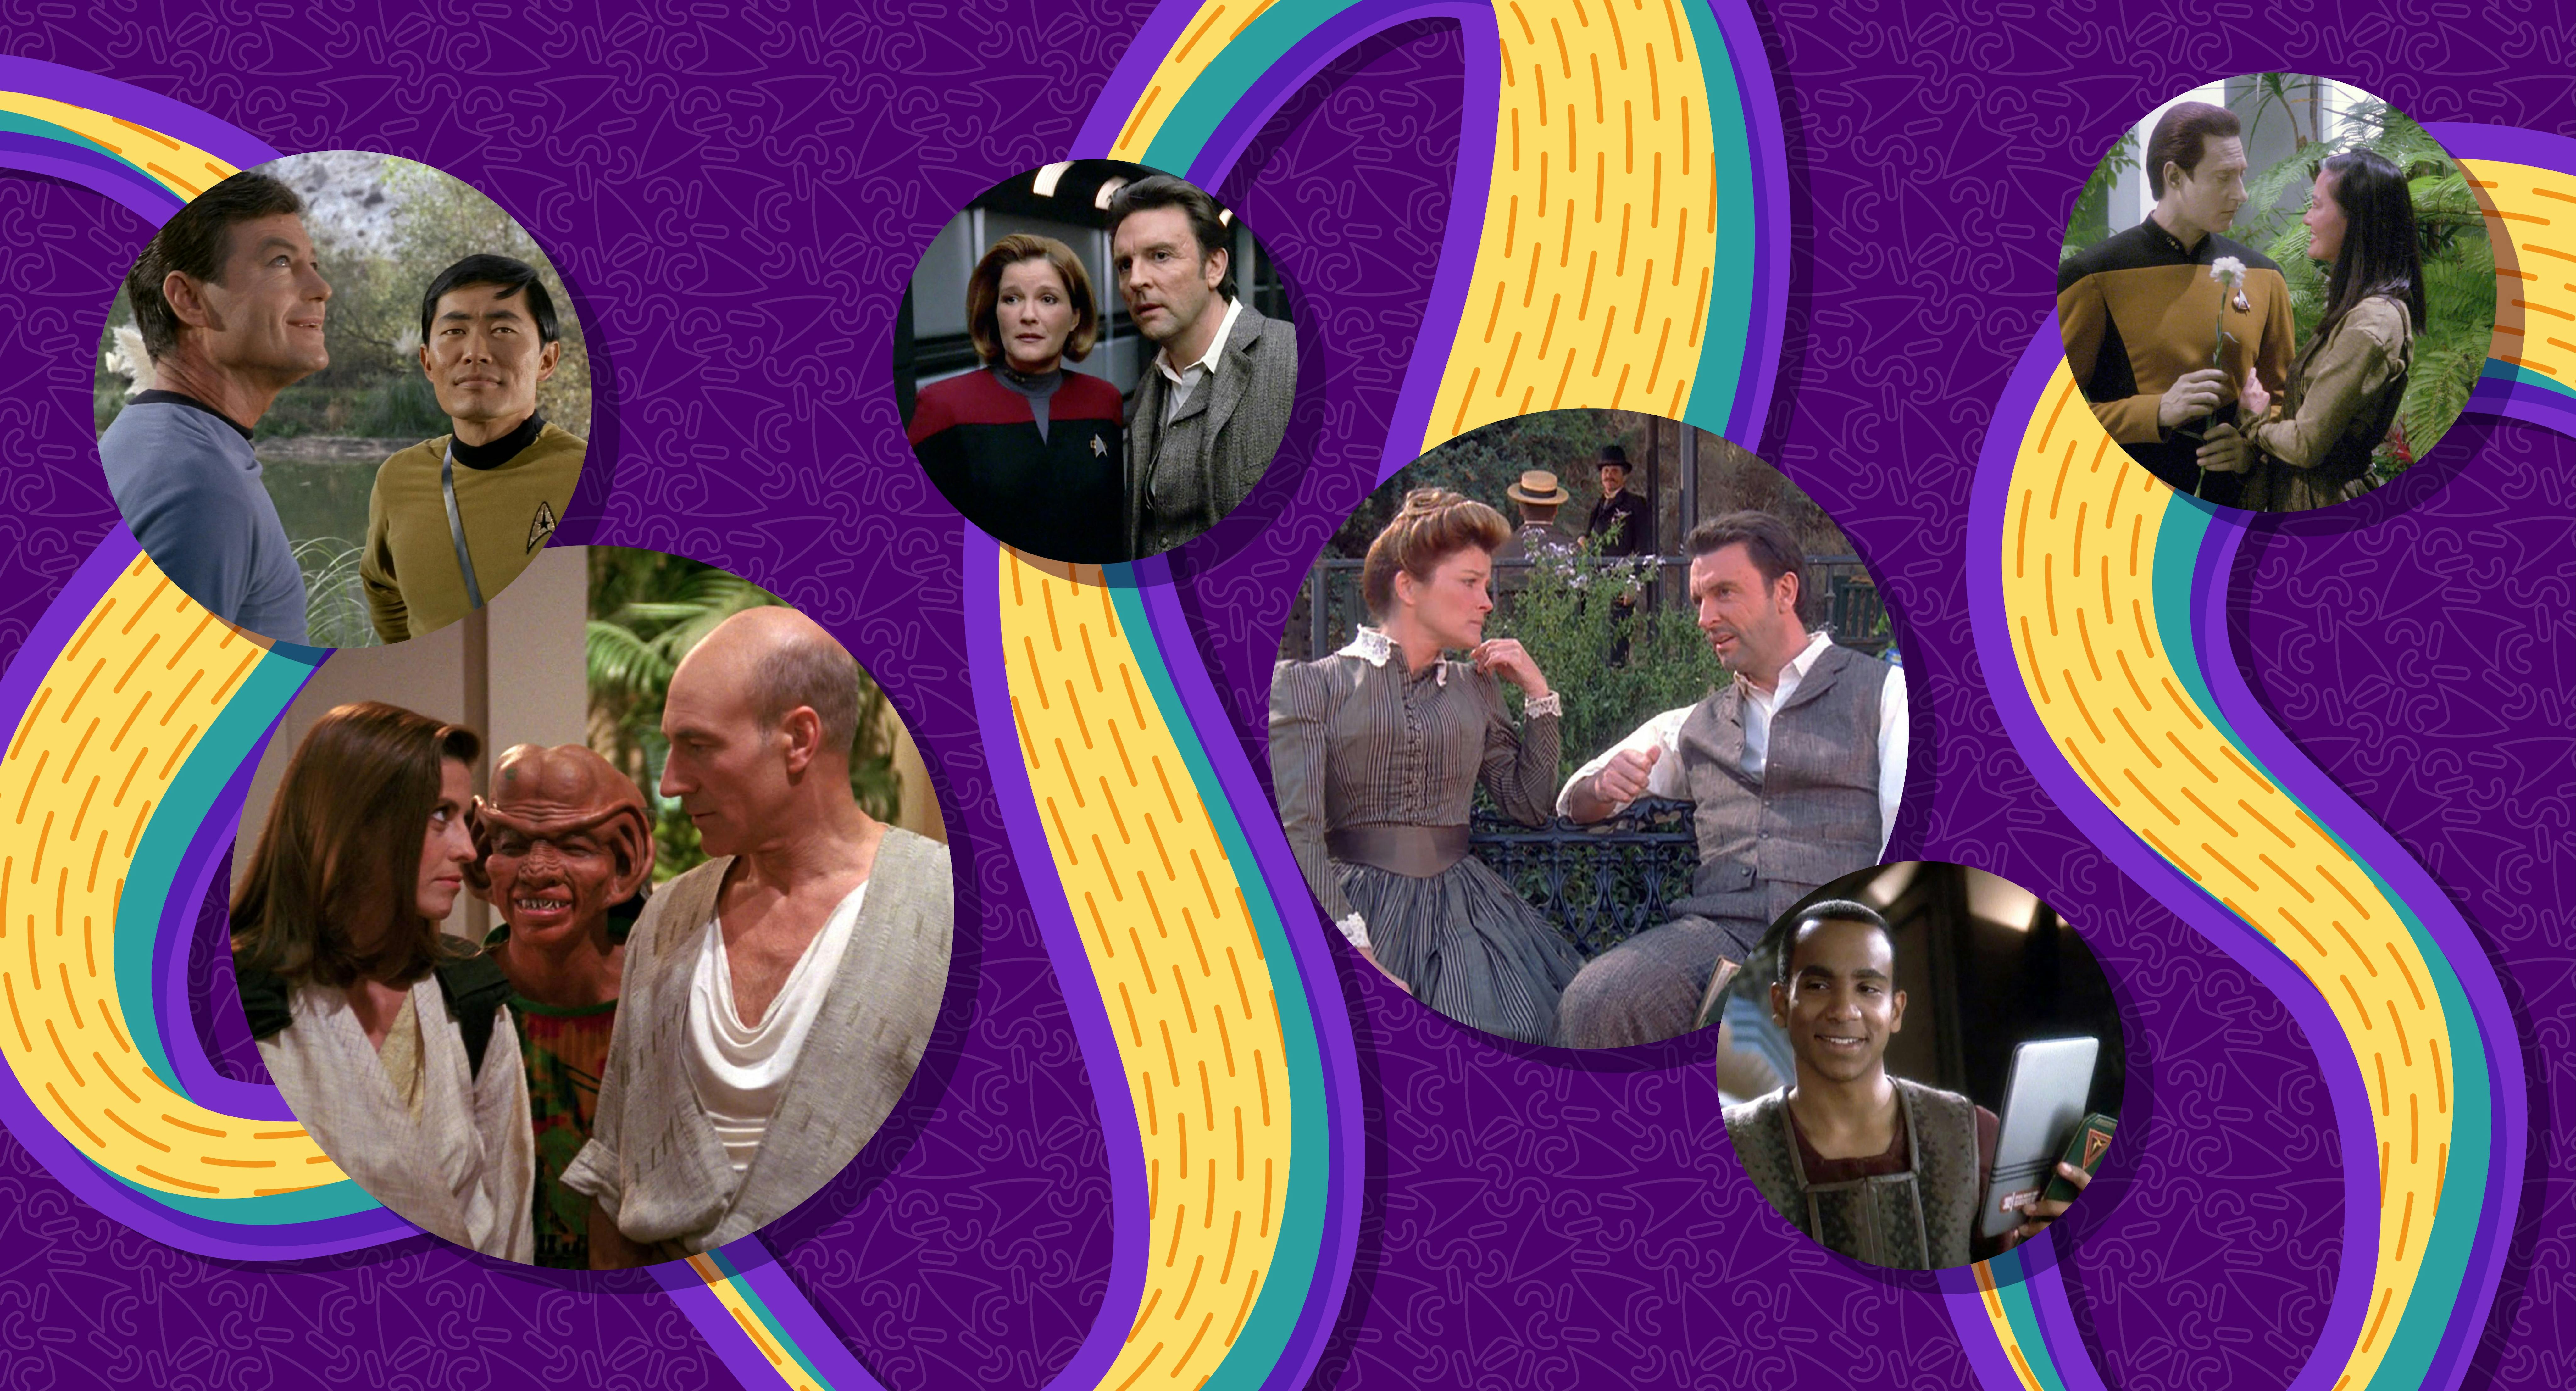 A collage of images from various Star Trek episodes against a purple backdrop.